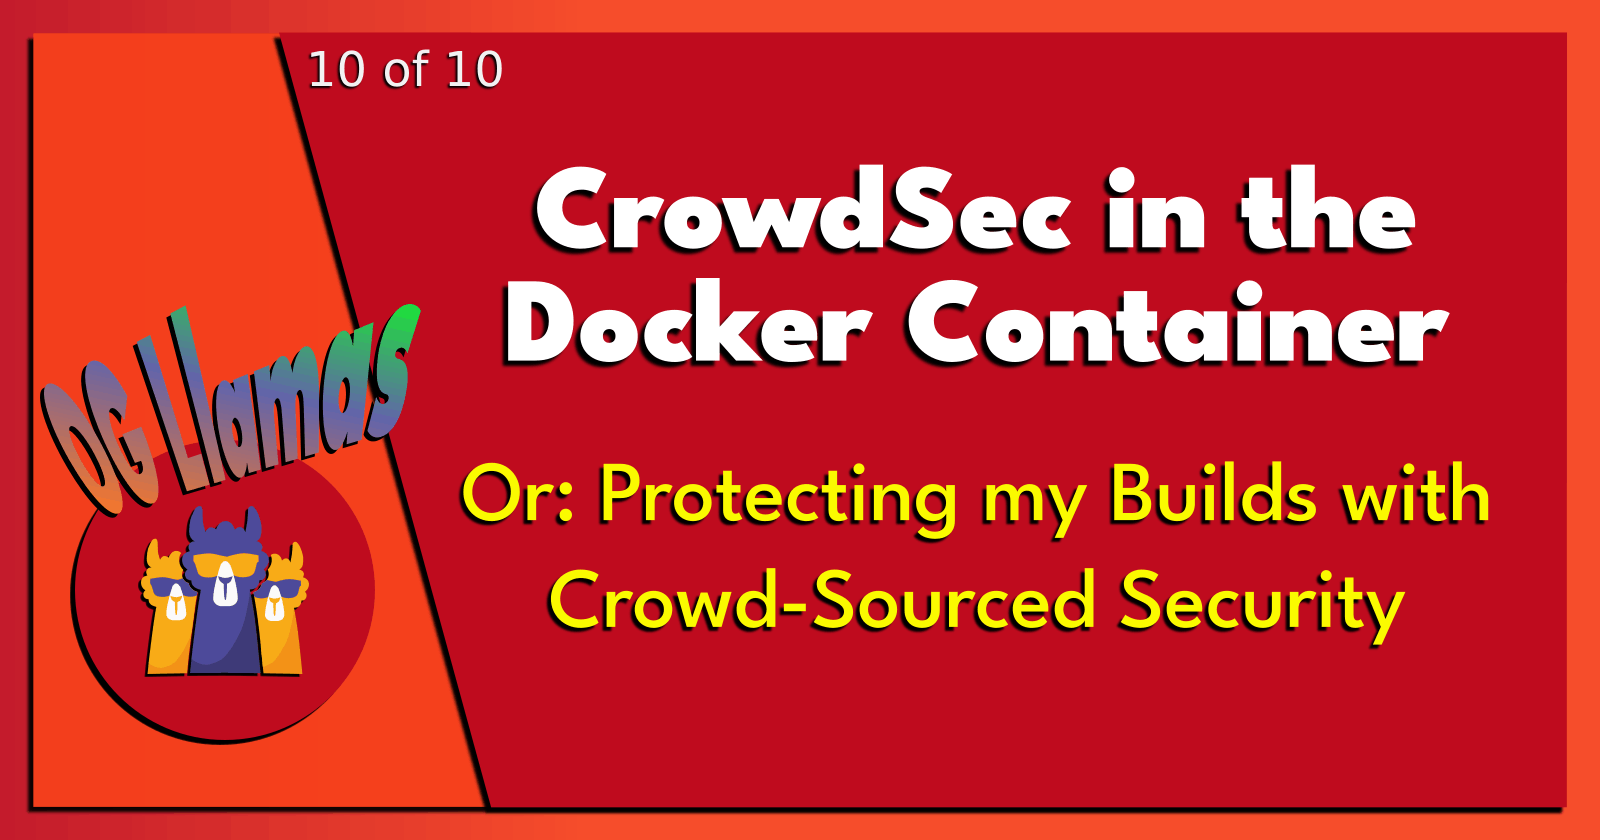 10 of 10: CrowdSec in the Docker Container.